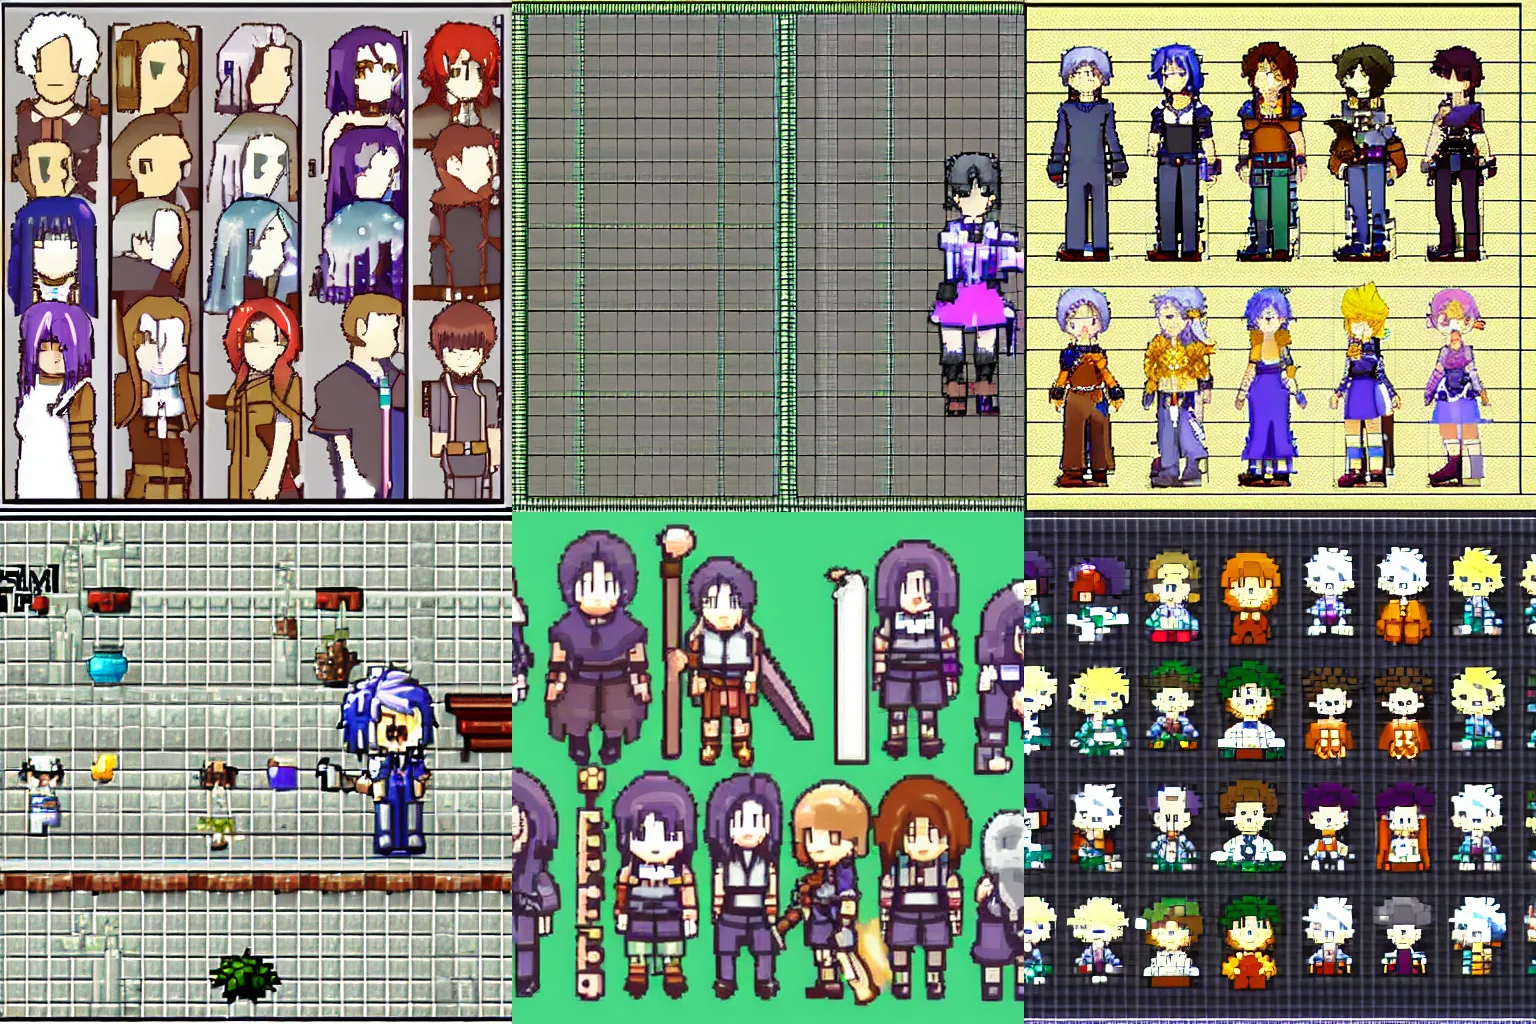 InuGou on X: Here's the rest of the RPG Maker protagonist sprites